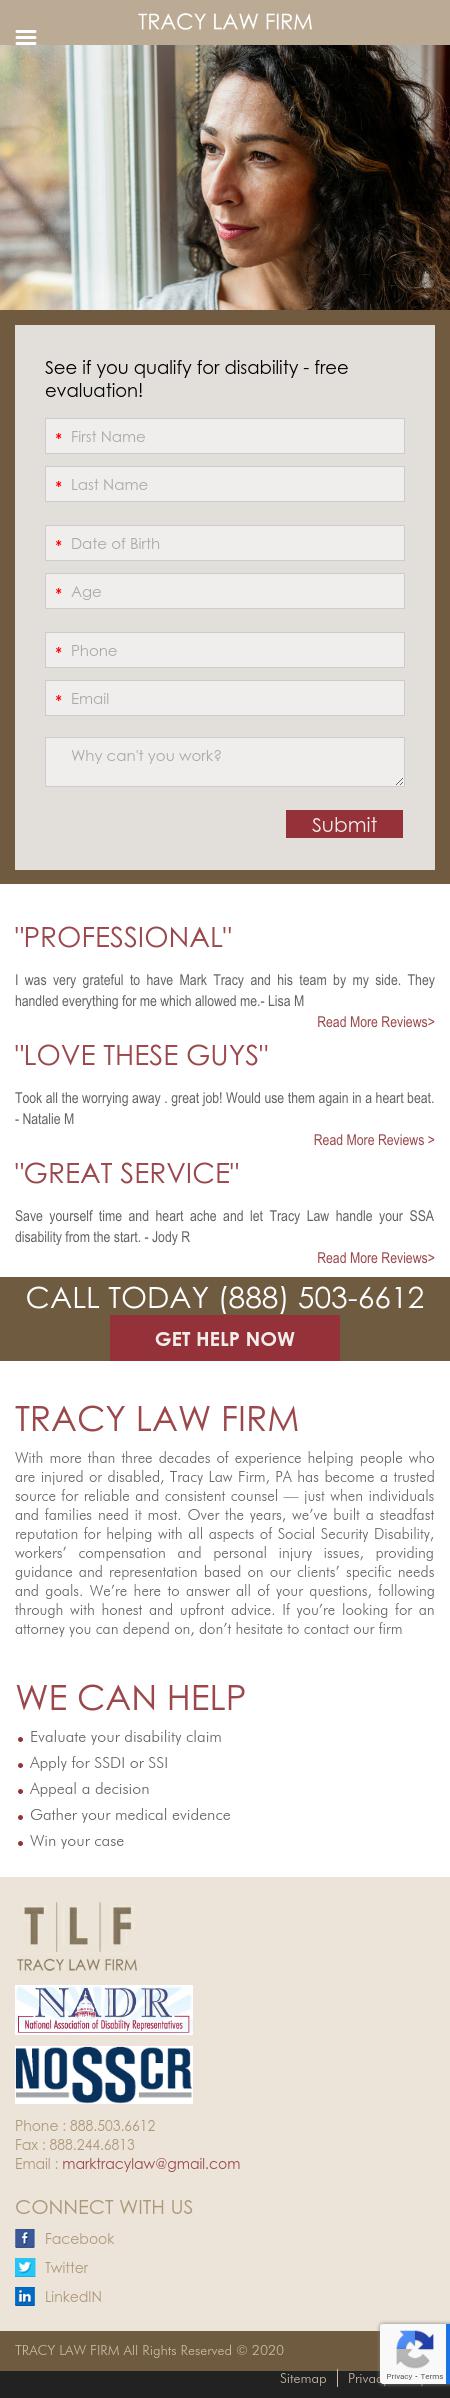 Tracy Law Firm - Mendota Heights MN Lawyers